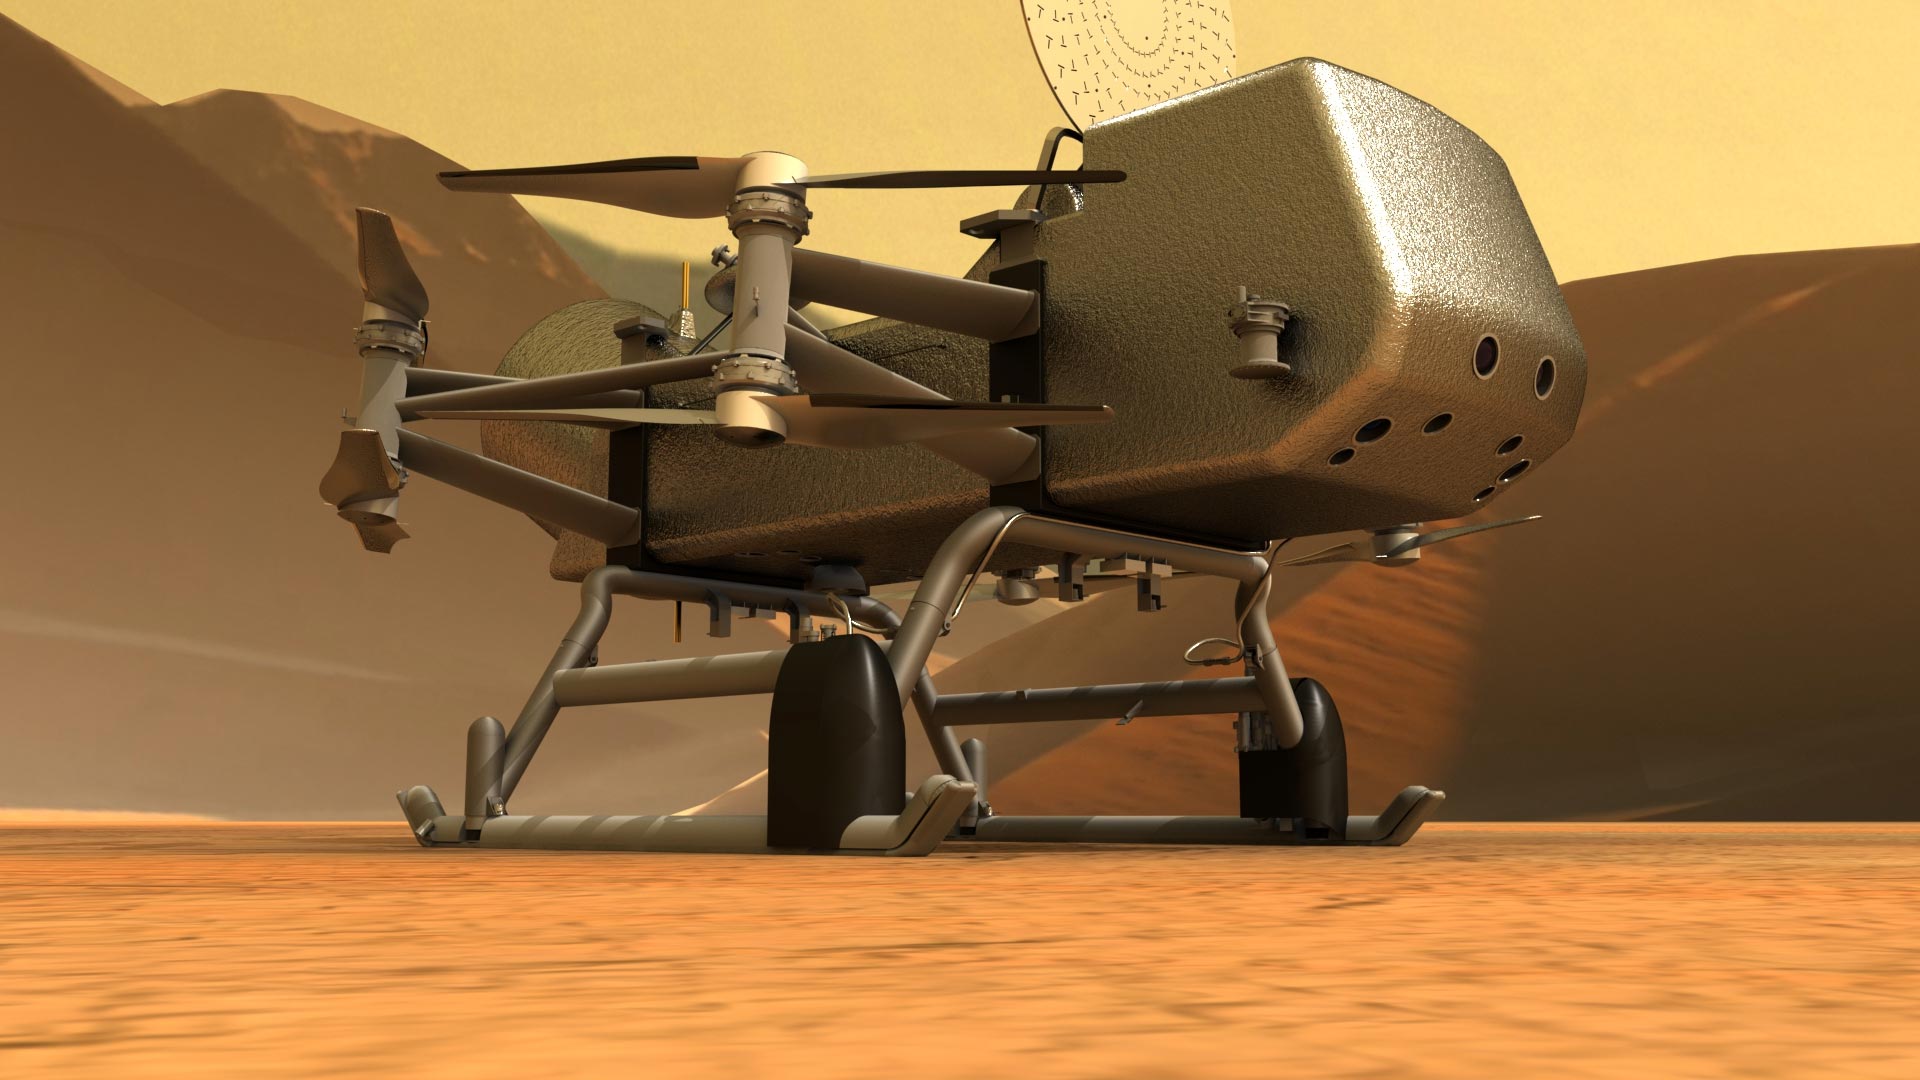 NASA Dragonfly Bound for Saturn’s Giant Moon Titan Could Reveal Chemistry Leading to Life